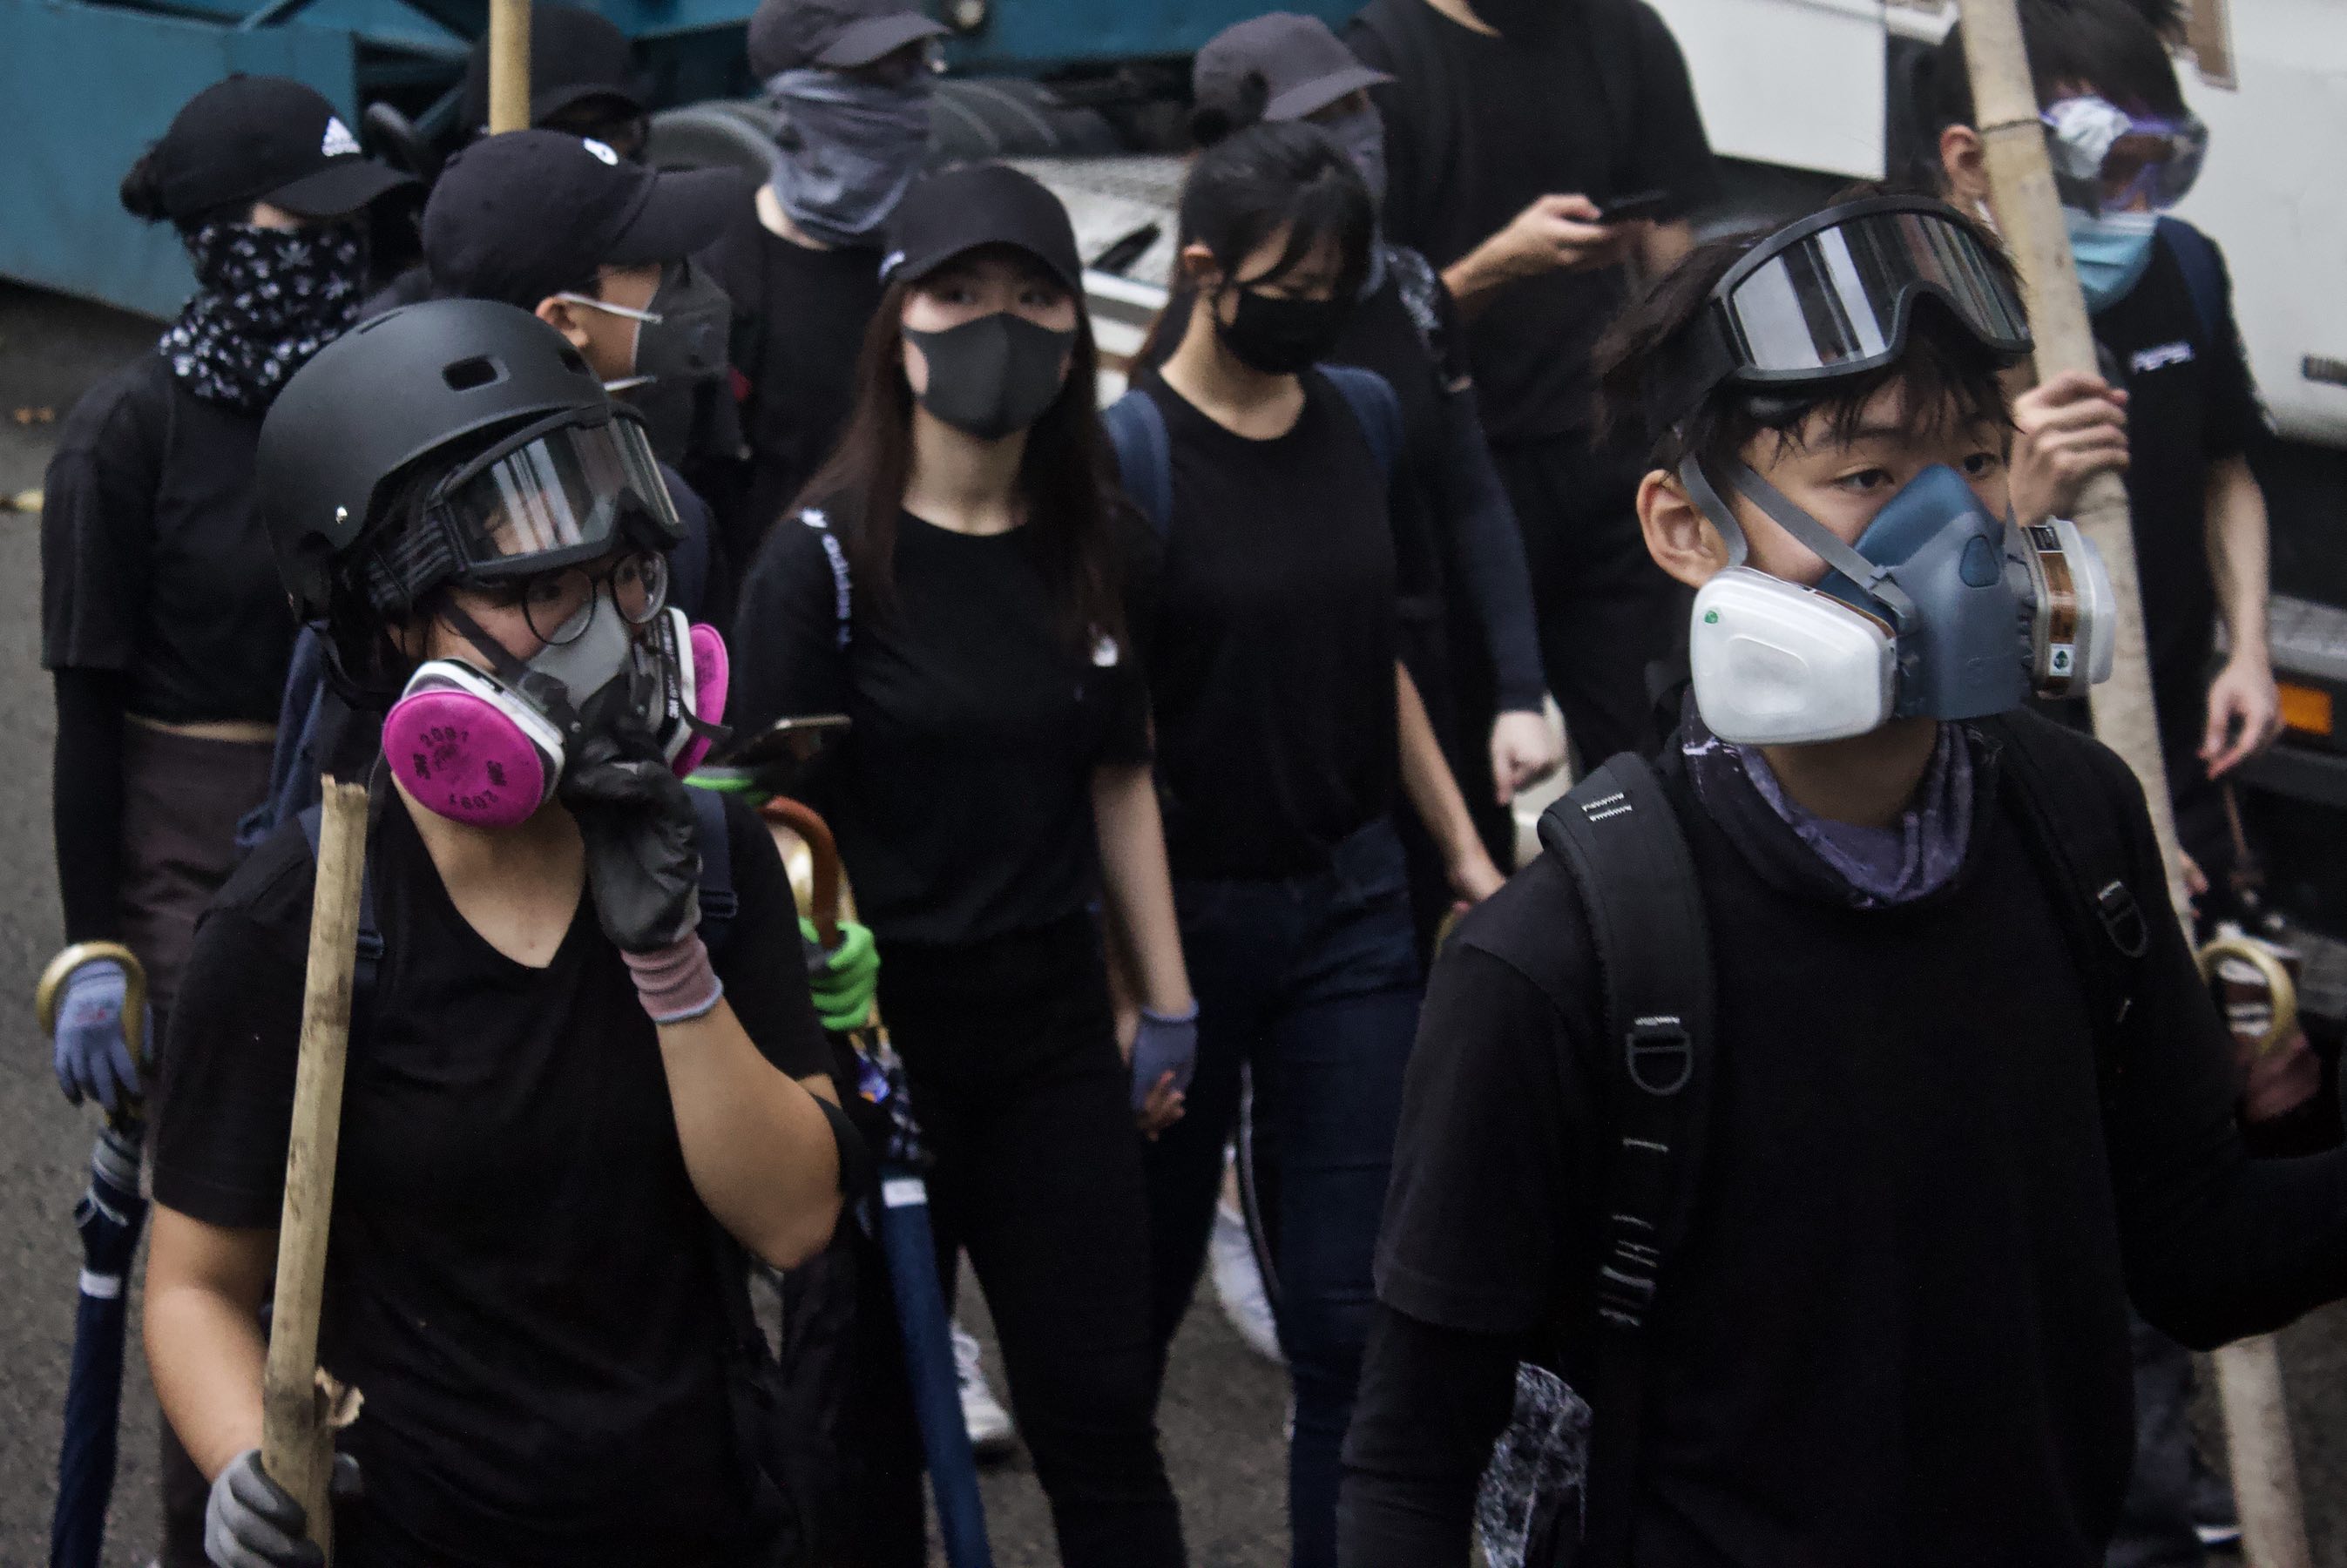 Masked protesters marching through Tai Kok Tsui in October. Photo by Vicky Wong.